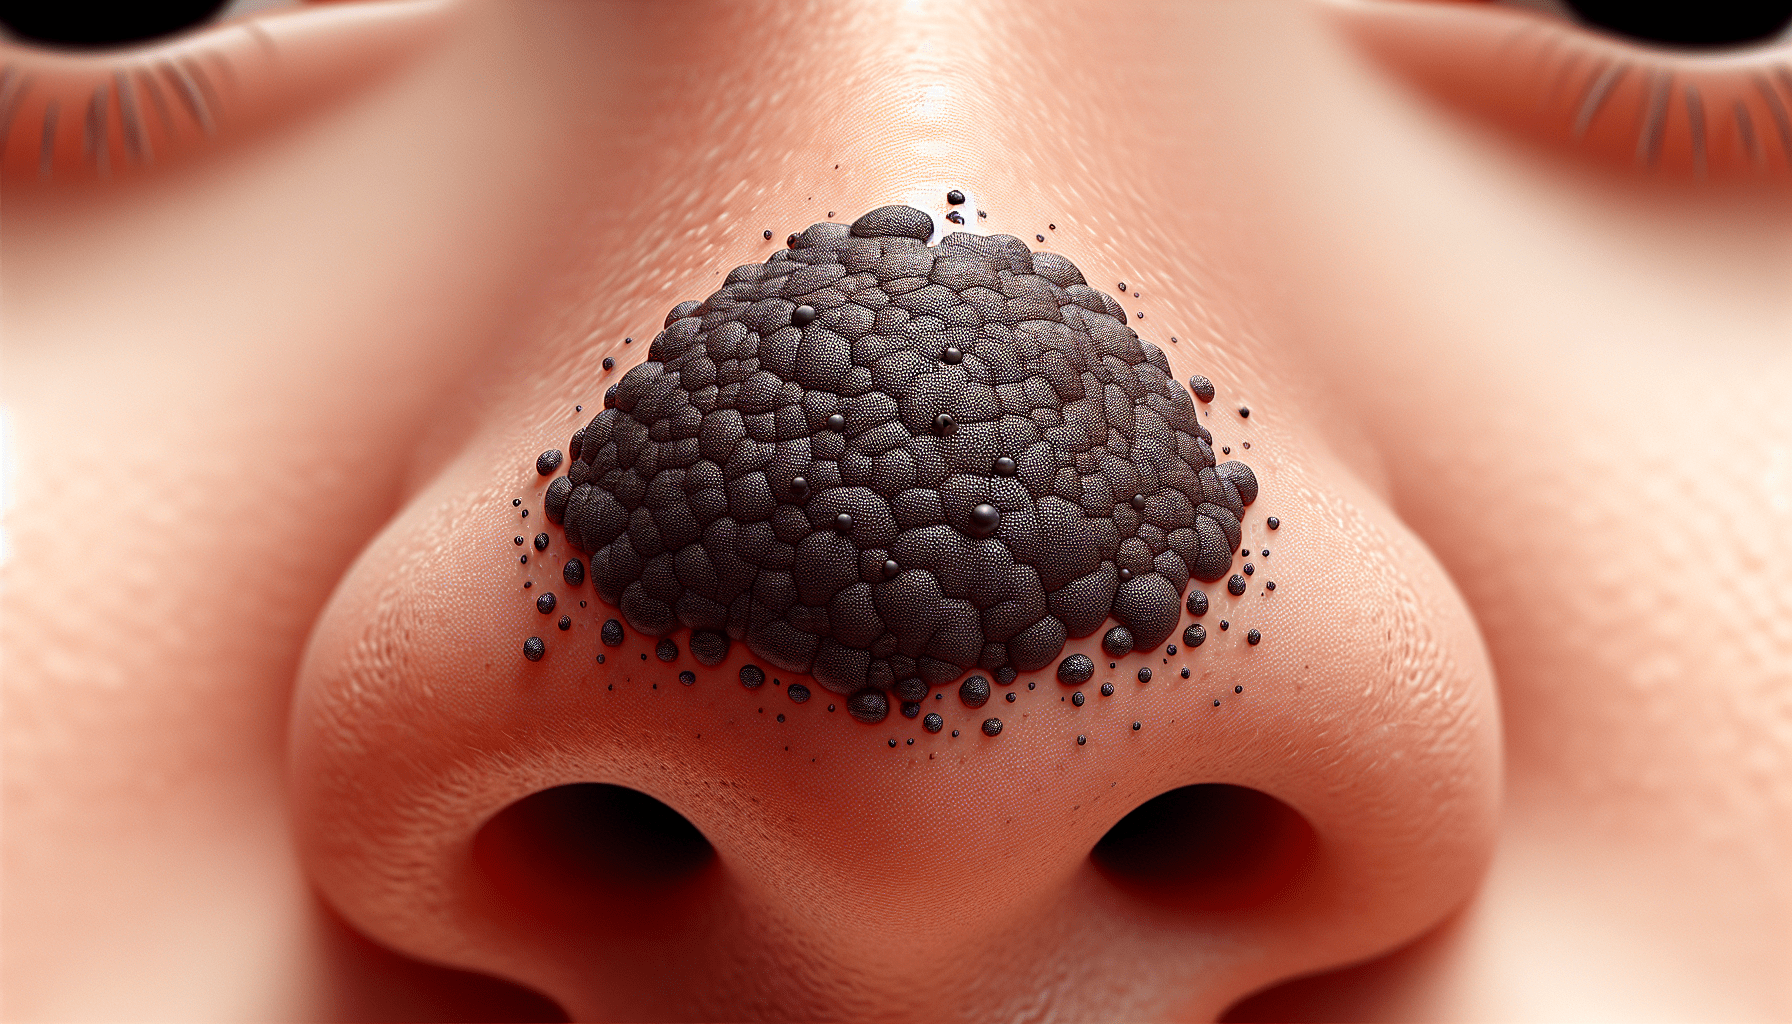 Do Blackheads Go Away If You Leave Them Alone?